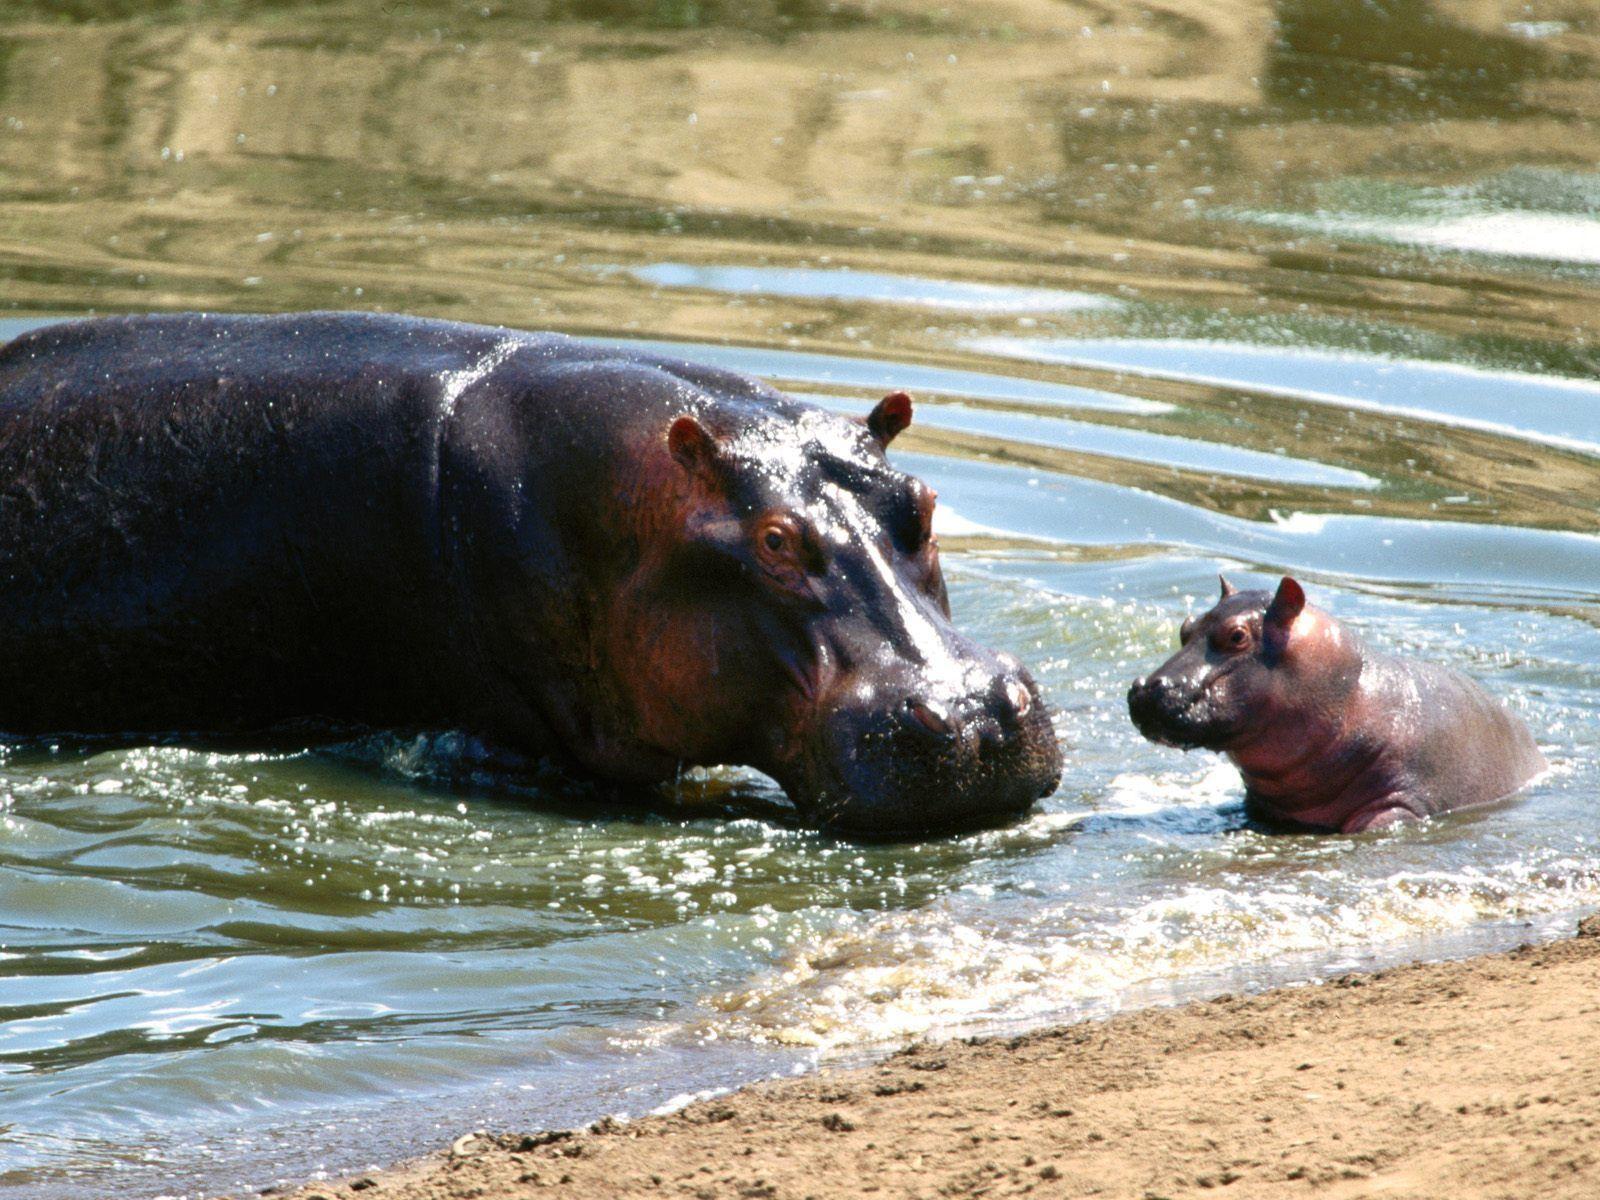 Hippos image Hippo Wallpaper HD wallpaper and background photo